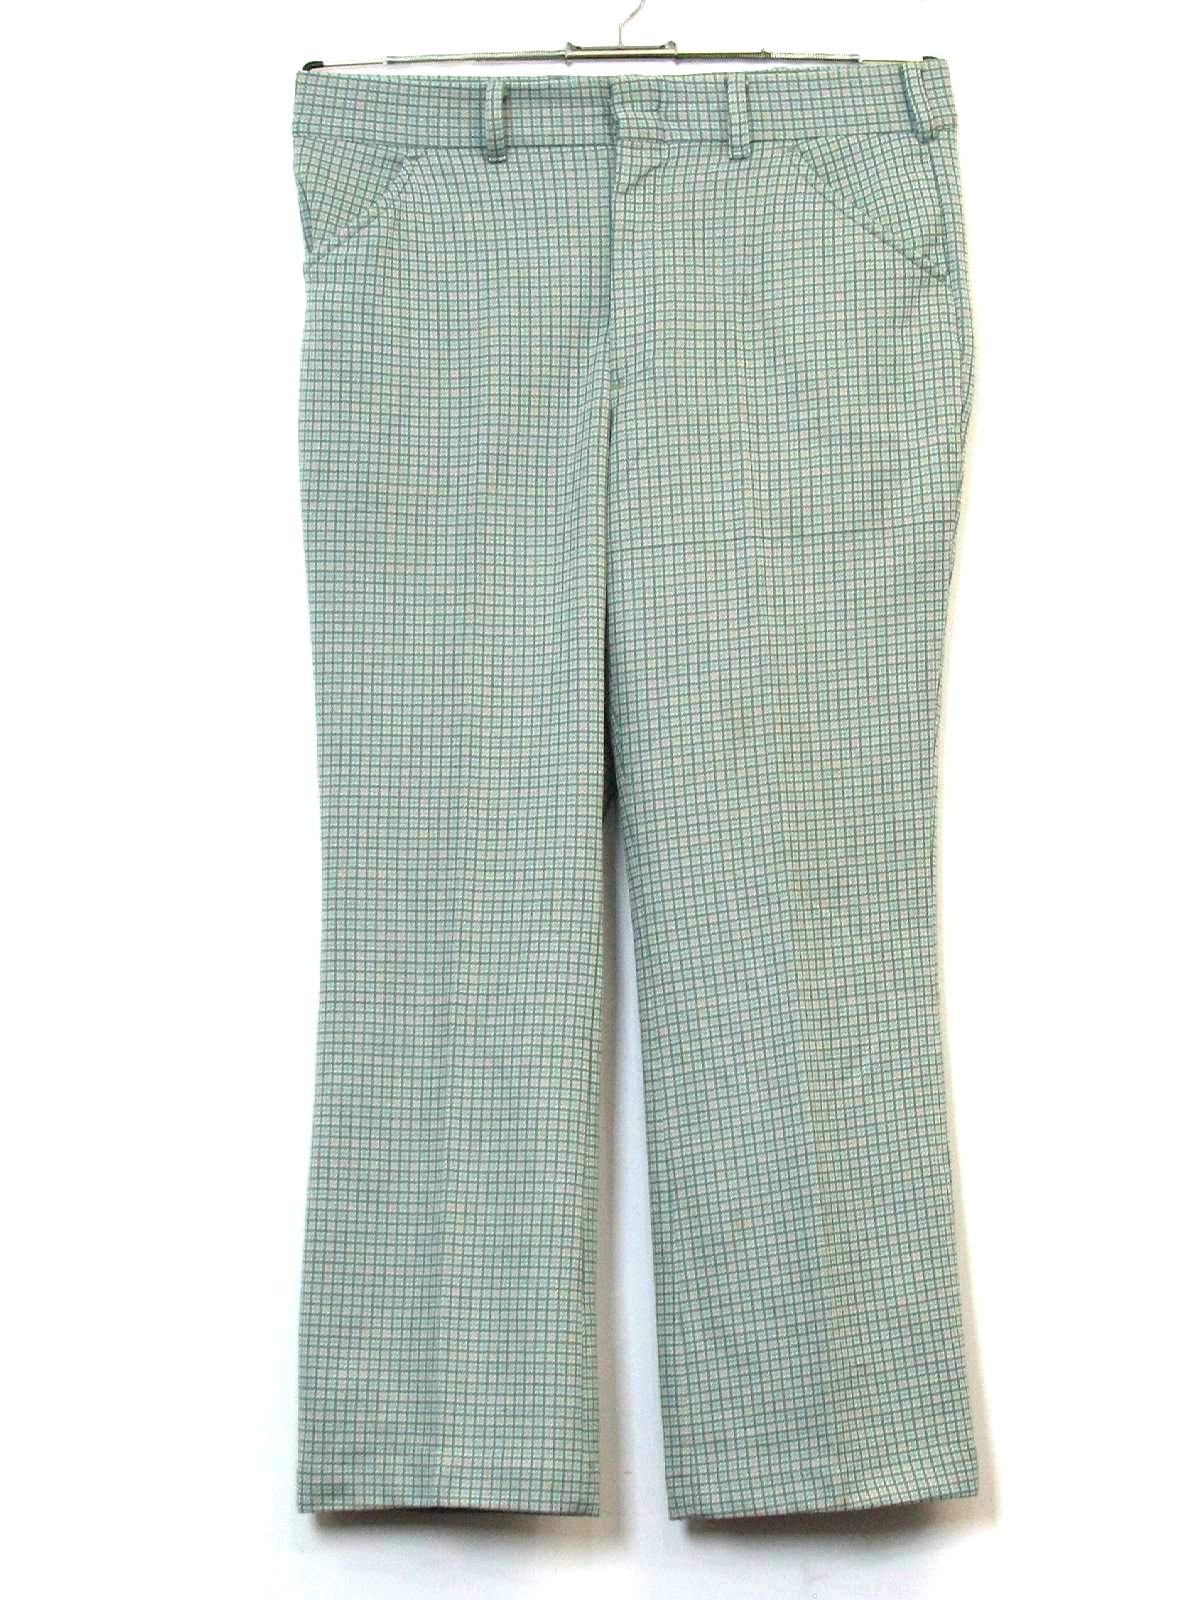 70's Vintage Pants: 70s -Missing Label- Mens green, white, tan and ...